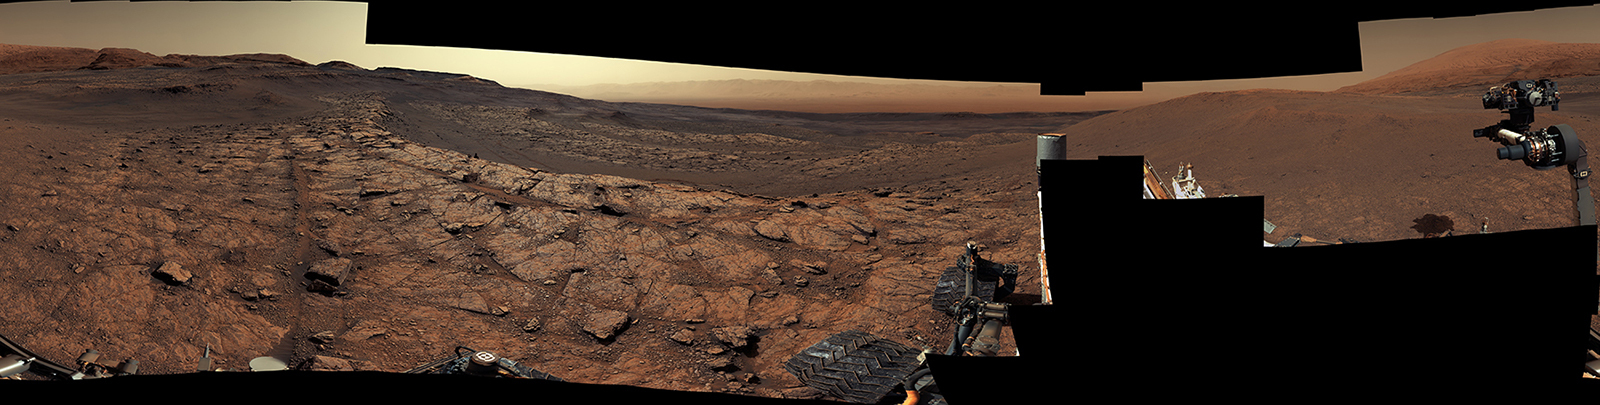 Read article: NASA's Curiosity Rover Reaches Its 3,000th Day on Mars